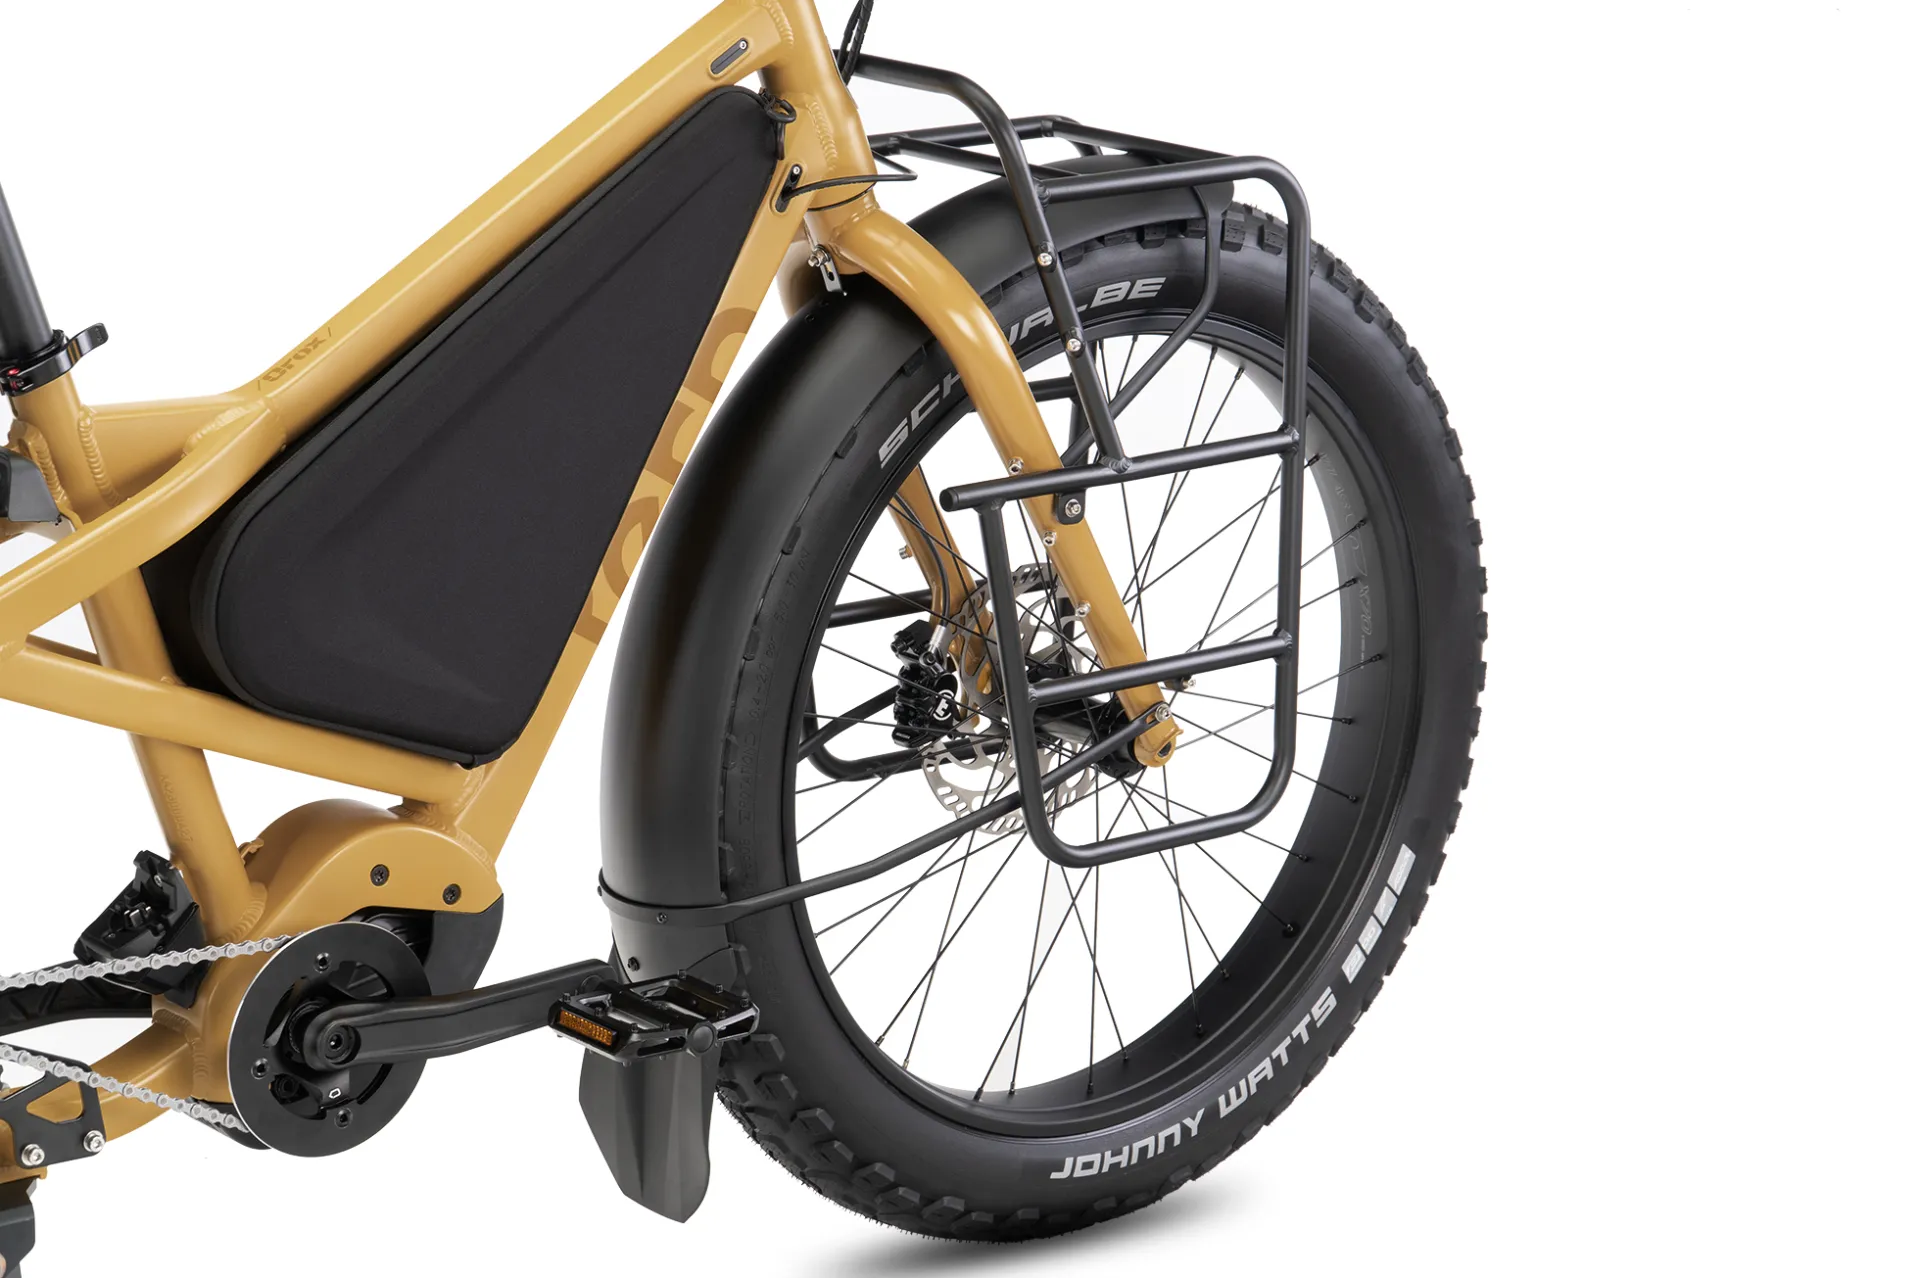 Trail Rack: Heavy-Duty Front Rack for the Orox | Tern Bicycles